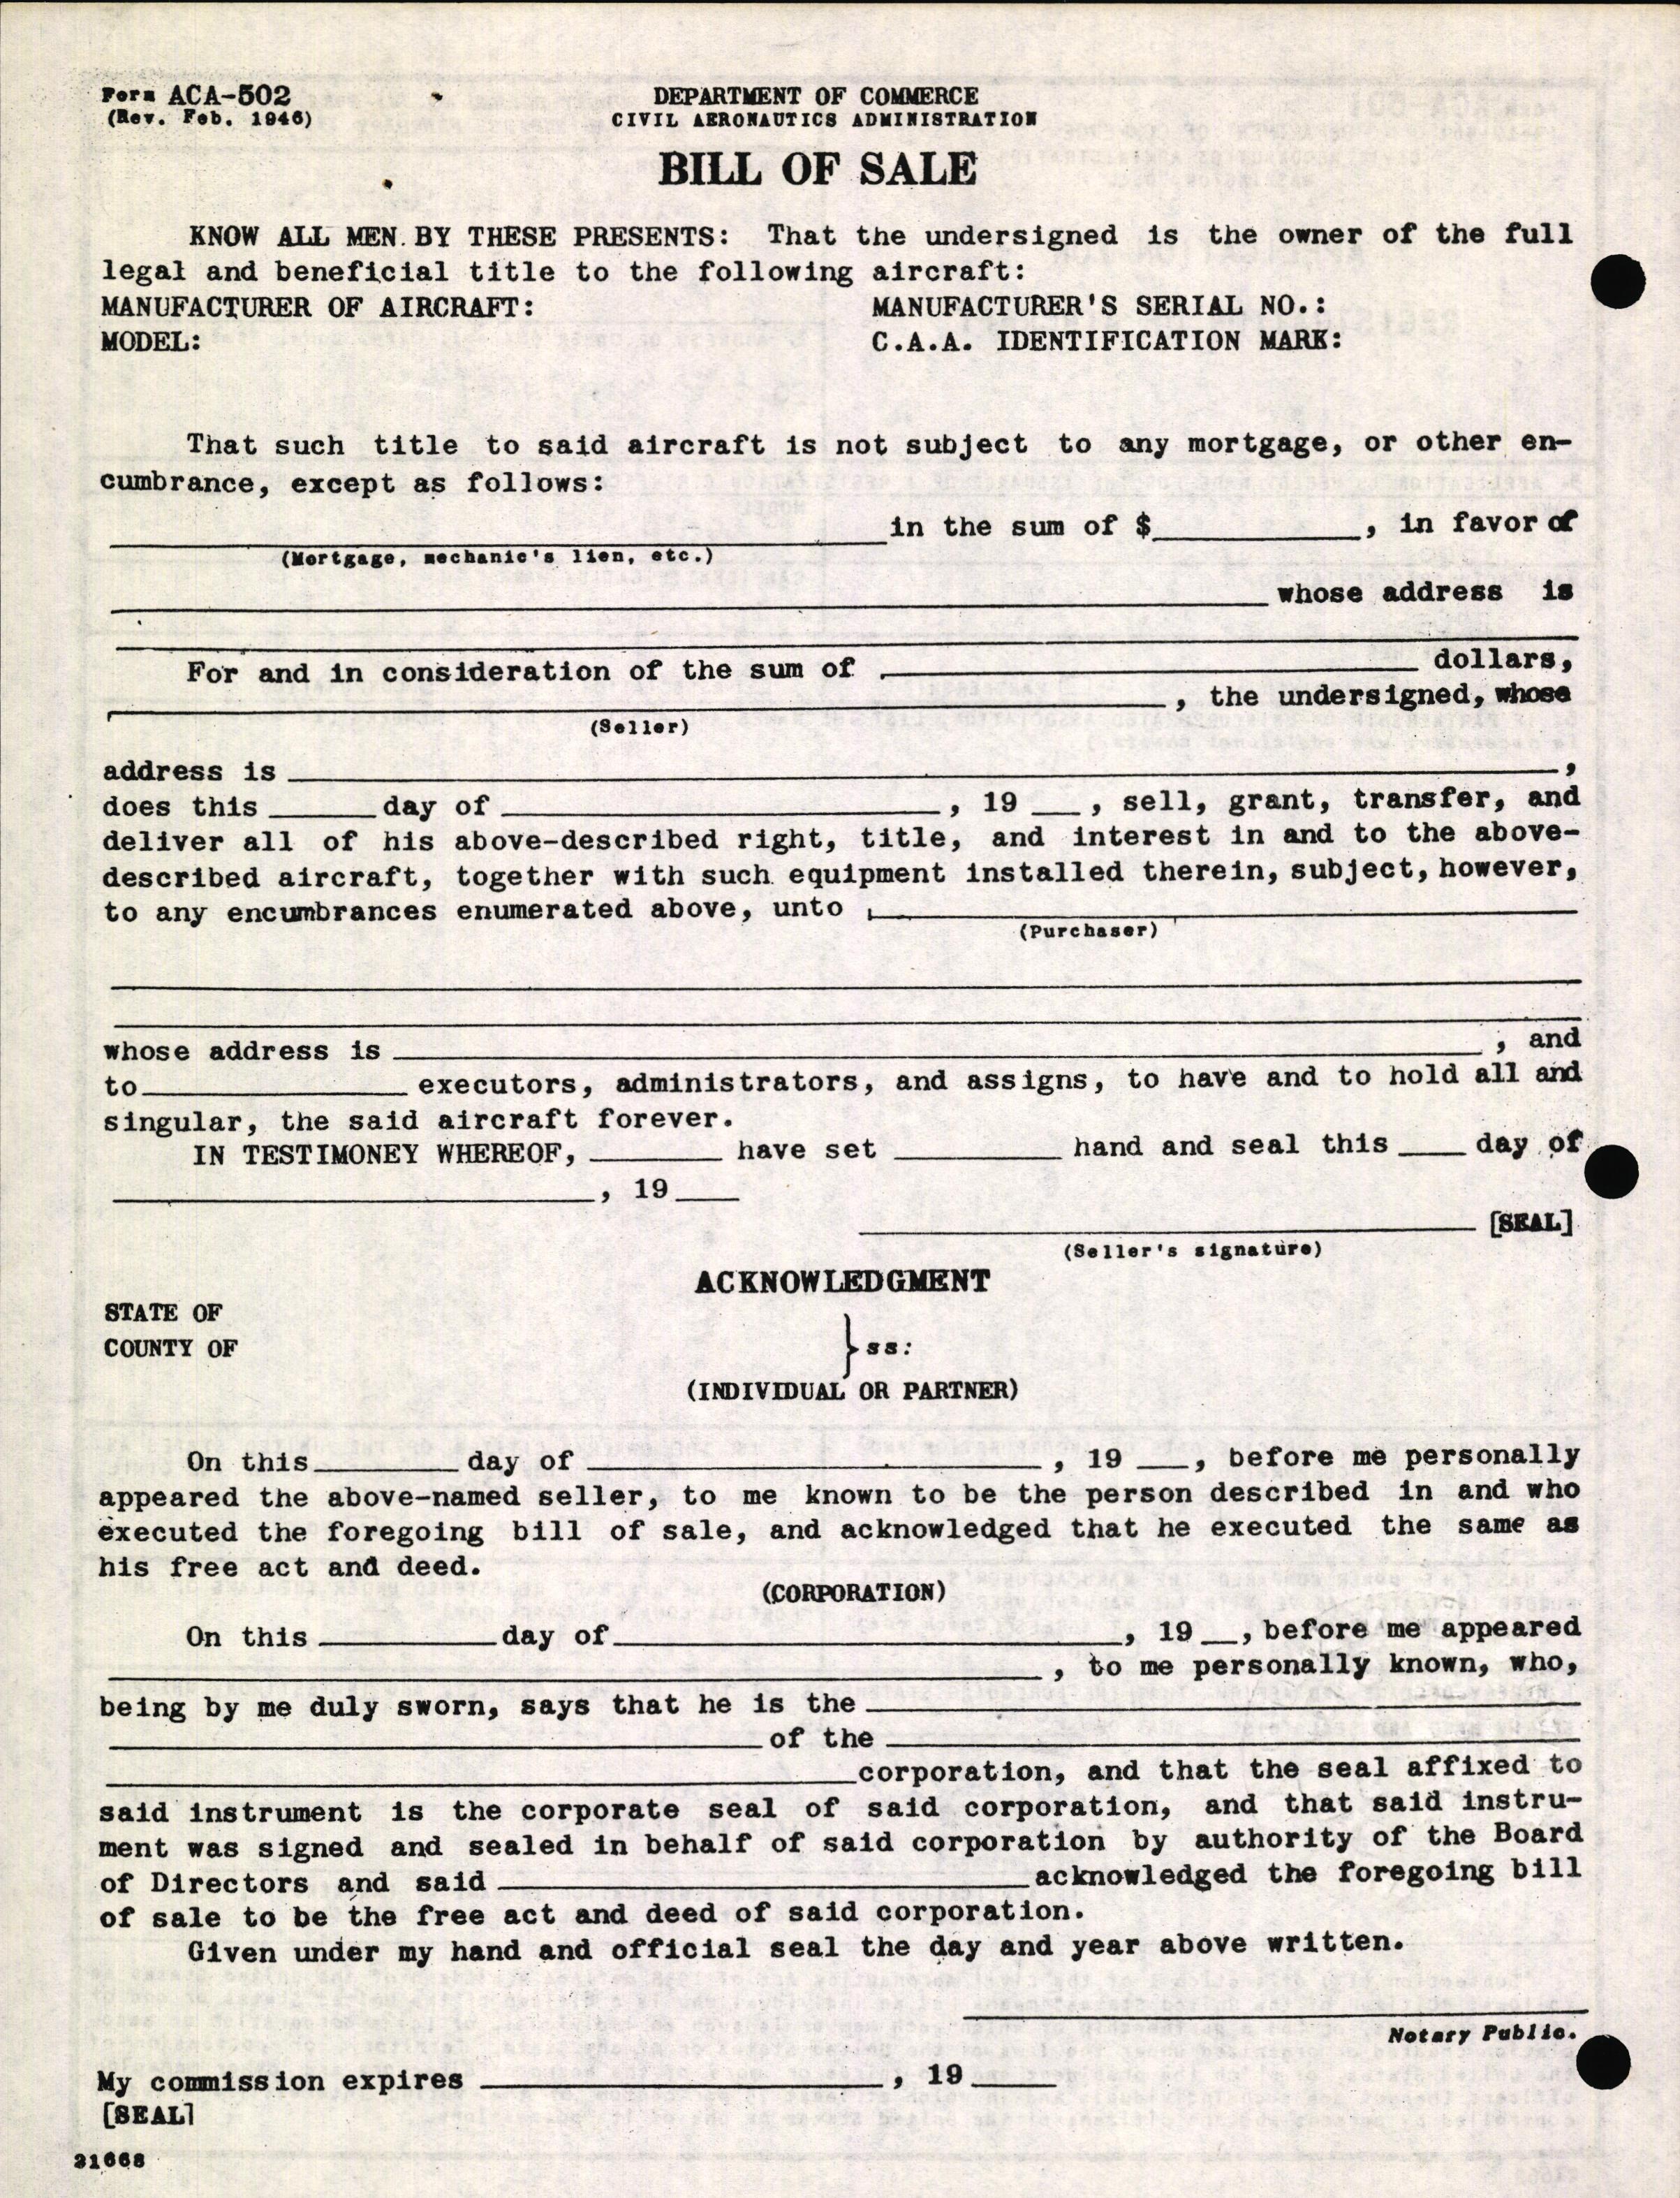 Sample page 4 from AirCorps Library document: Technical Information for Serial Number 2204